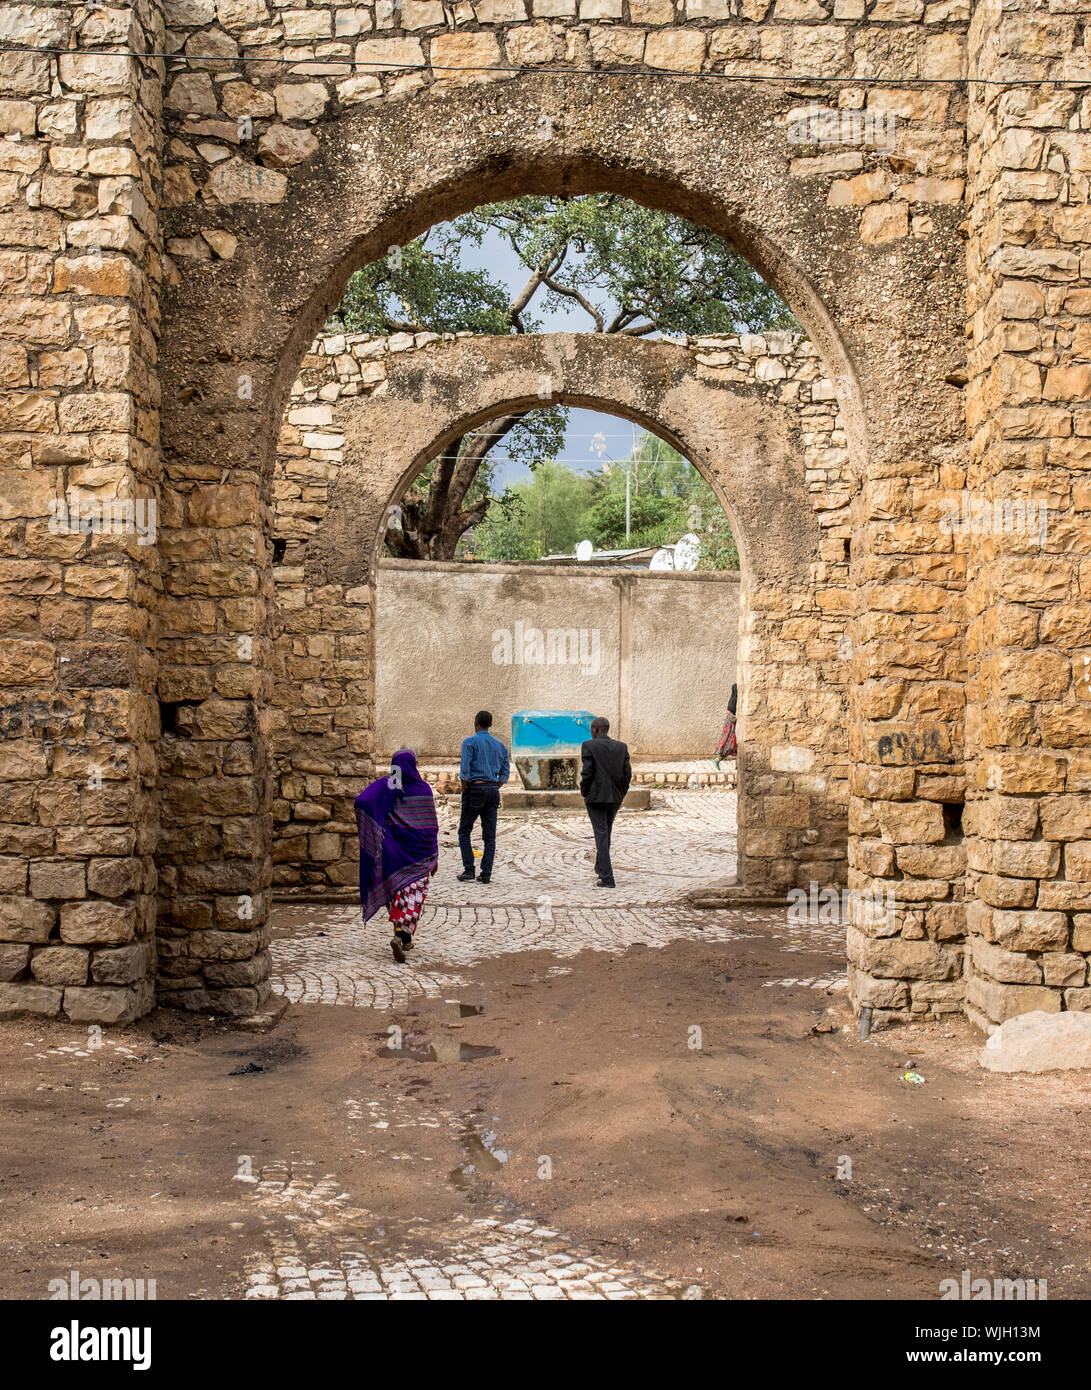 HARAR, ETHIOPIA-MARCH 26, 2017: Buda Gate, also known as Badro bari, Karra Budawa, or Hakim Gate, is one of the entrances to Jugol, the fortified hist Stock Photo